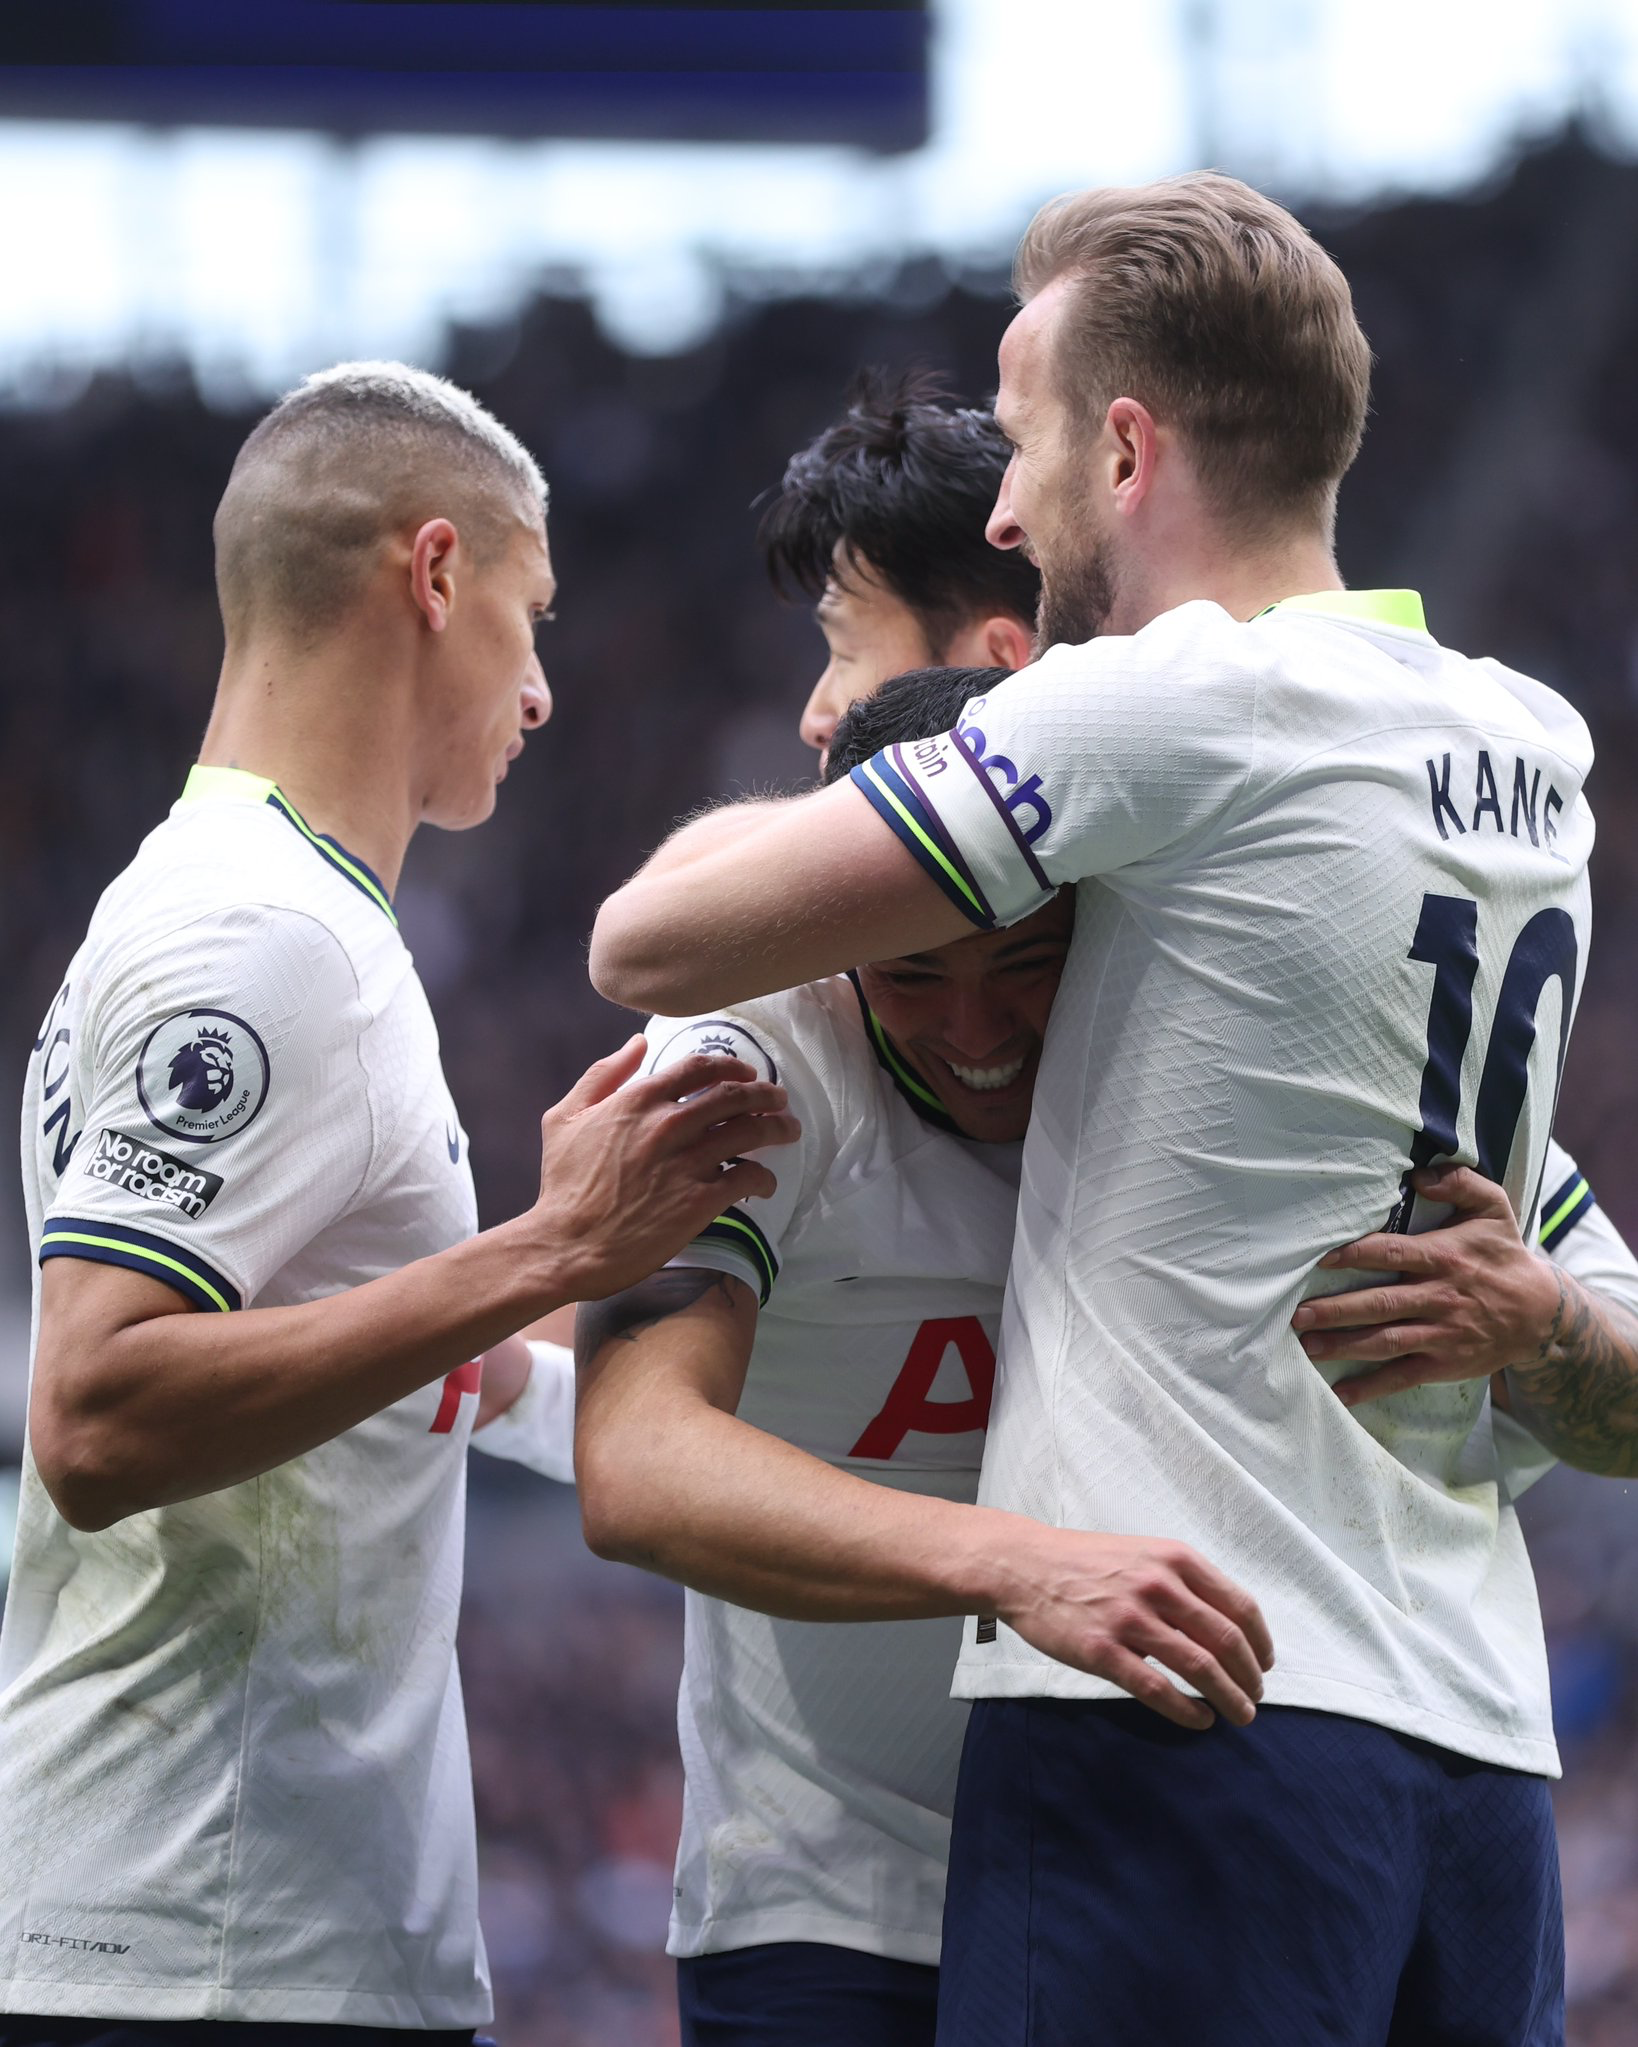 Pedro Porro gets a hug from Harry Kane after assisting the striker's goal.